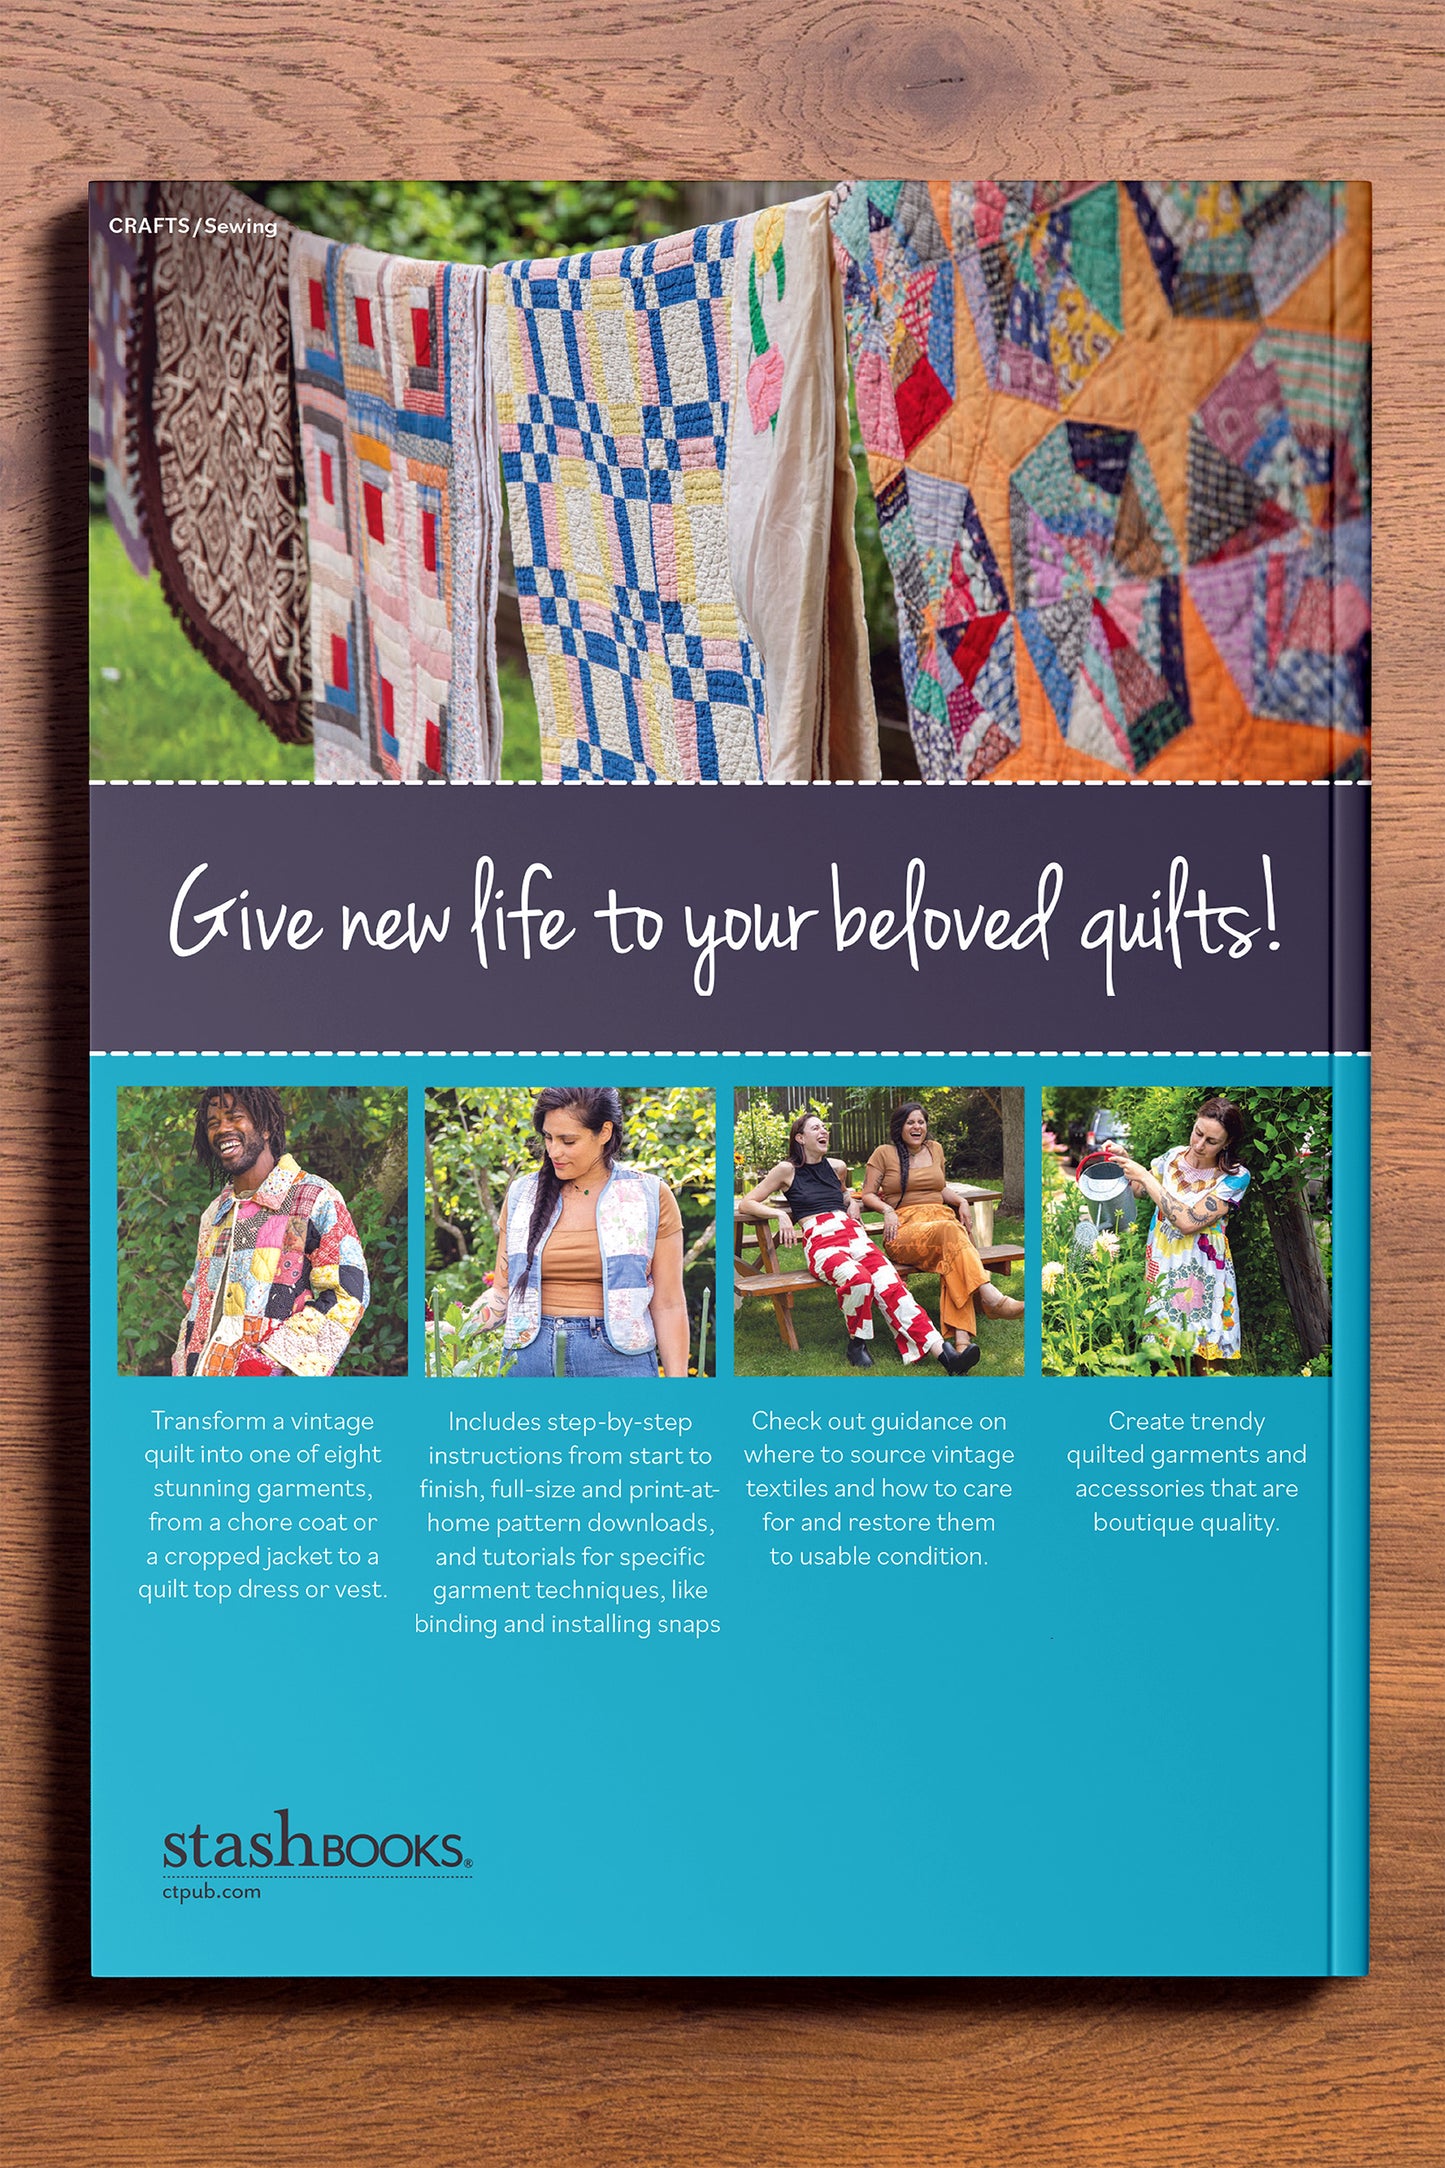 Back Cover of Reclaimed Quilts, Sew Modern Clothing & Accessories From Vintage Textiles Book Written By Kathleen McVeigh and Dale Donaldson